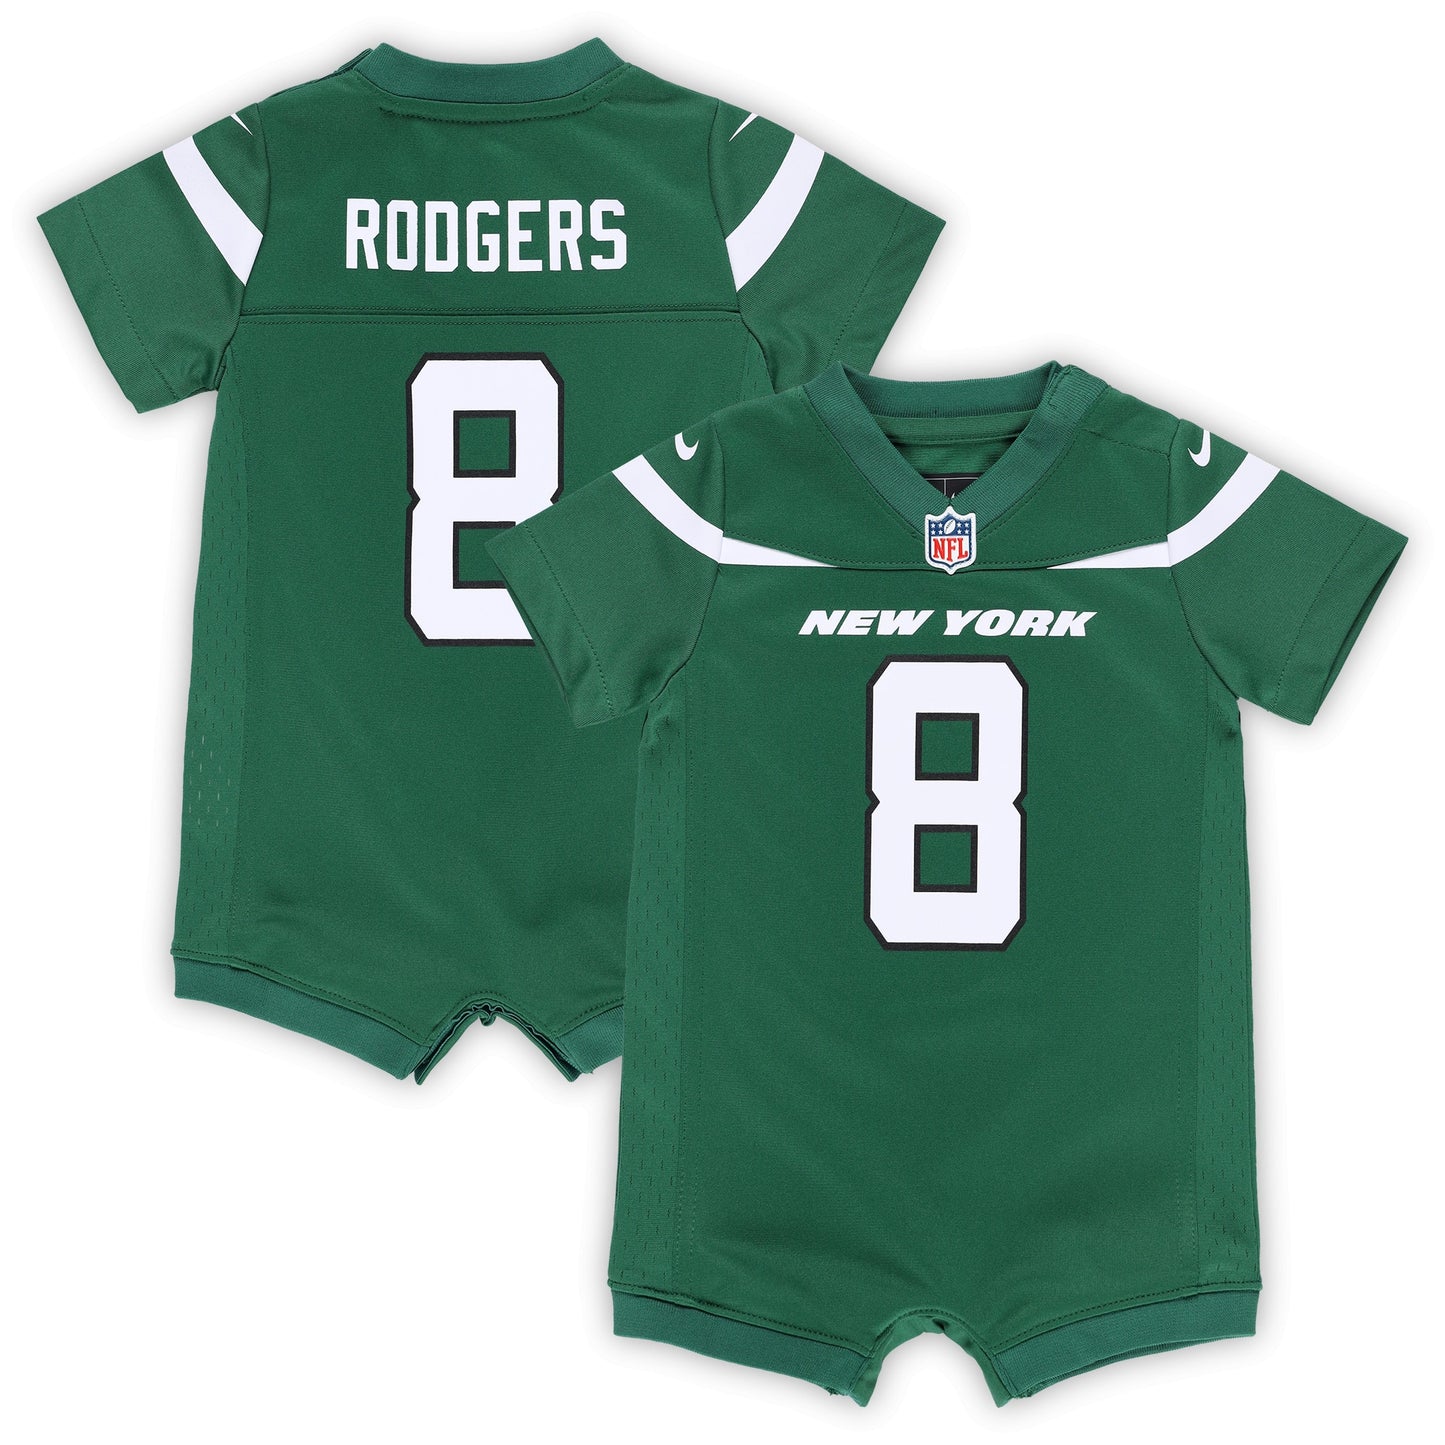 Aaron Rodgers New York Jets Nike Newborn & Infant Game Romper Jersey - Green